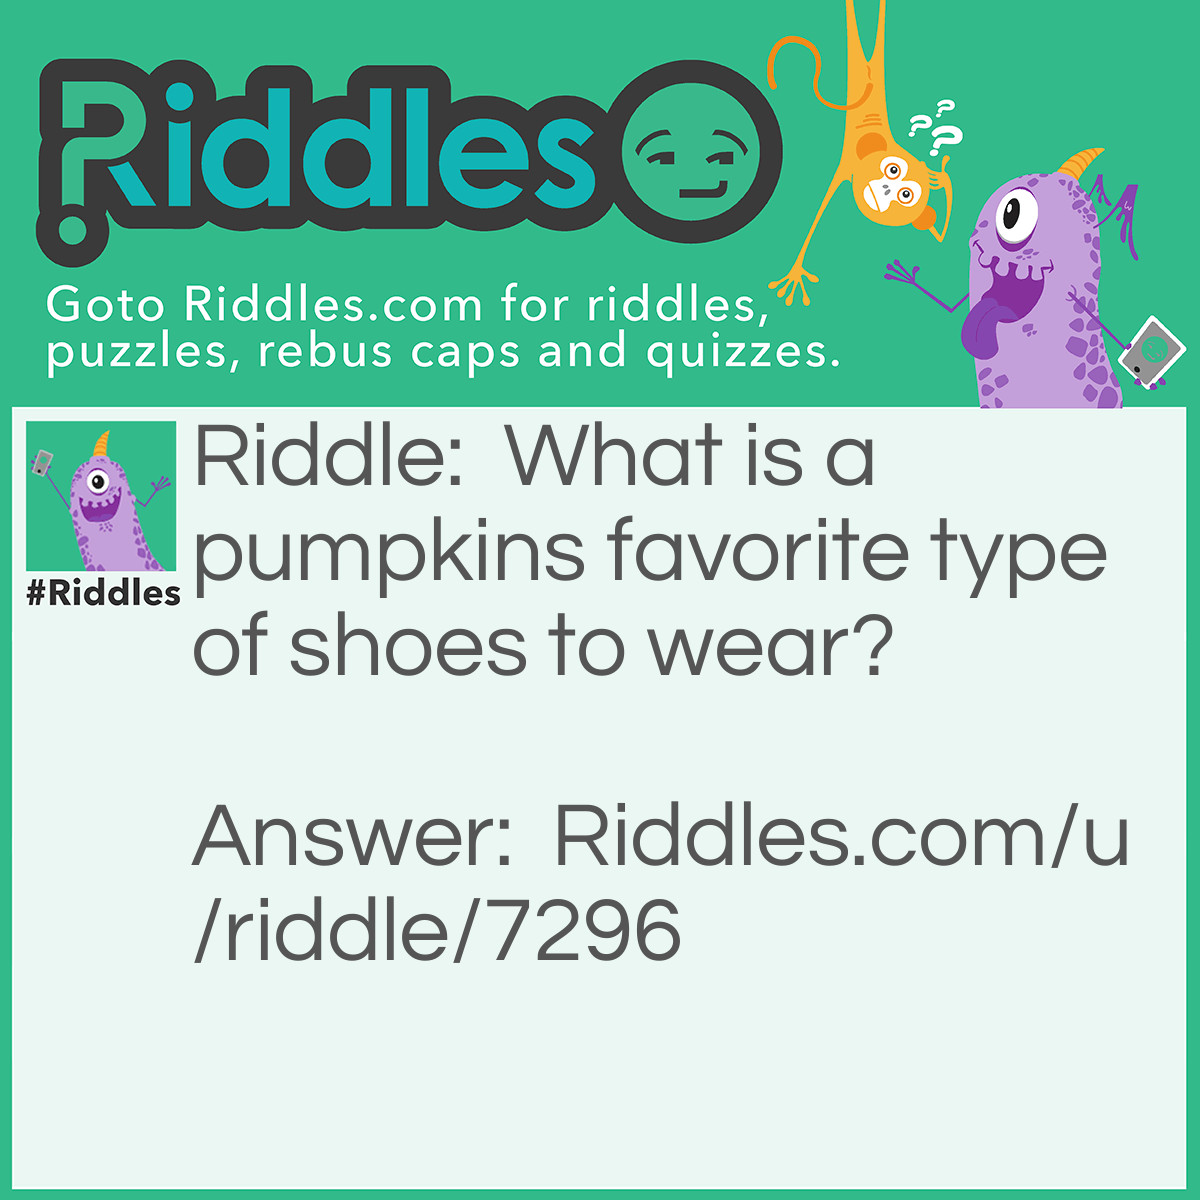 Riddle: What is a pumpkins favorite type of shoes to wear? Answer: Pumps! Get (pump)kin.